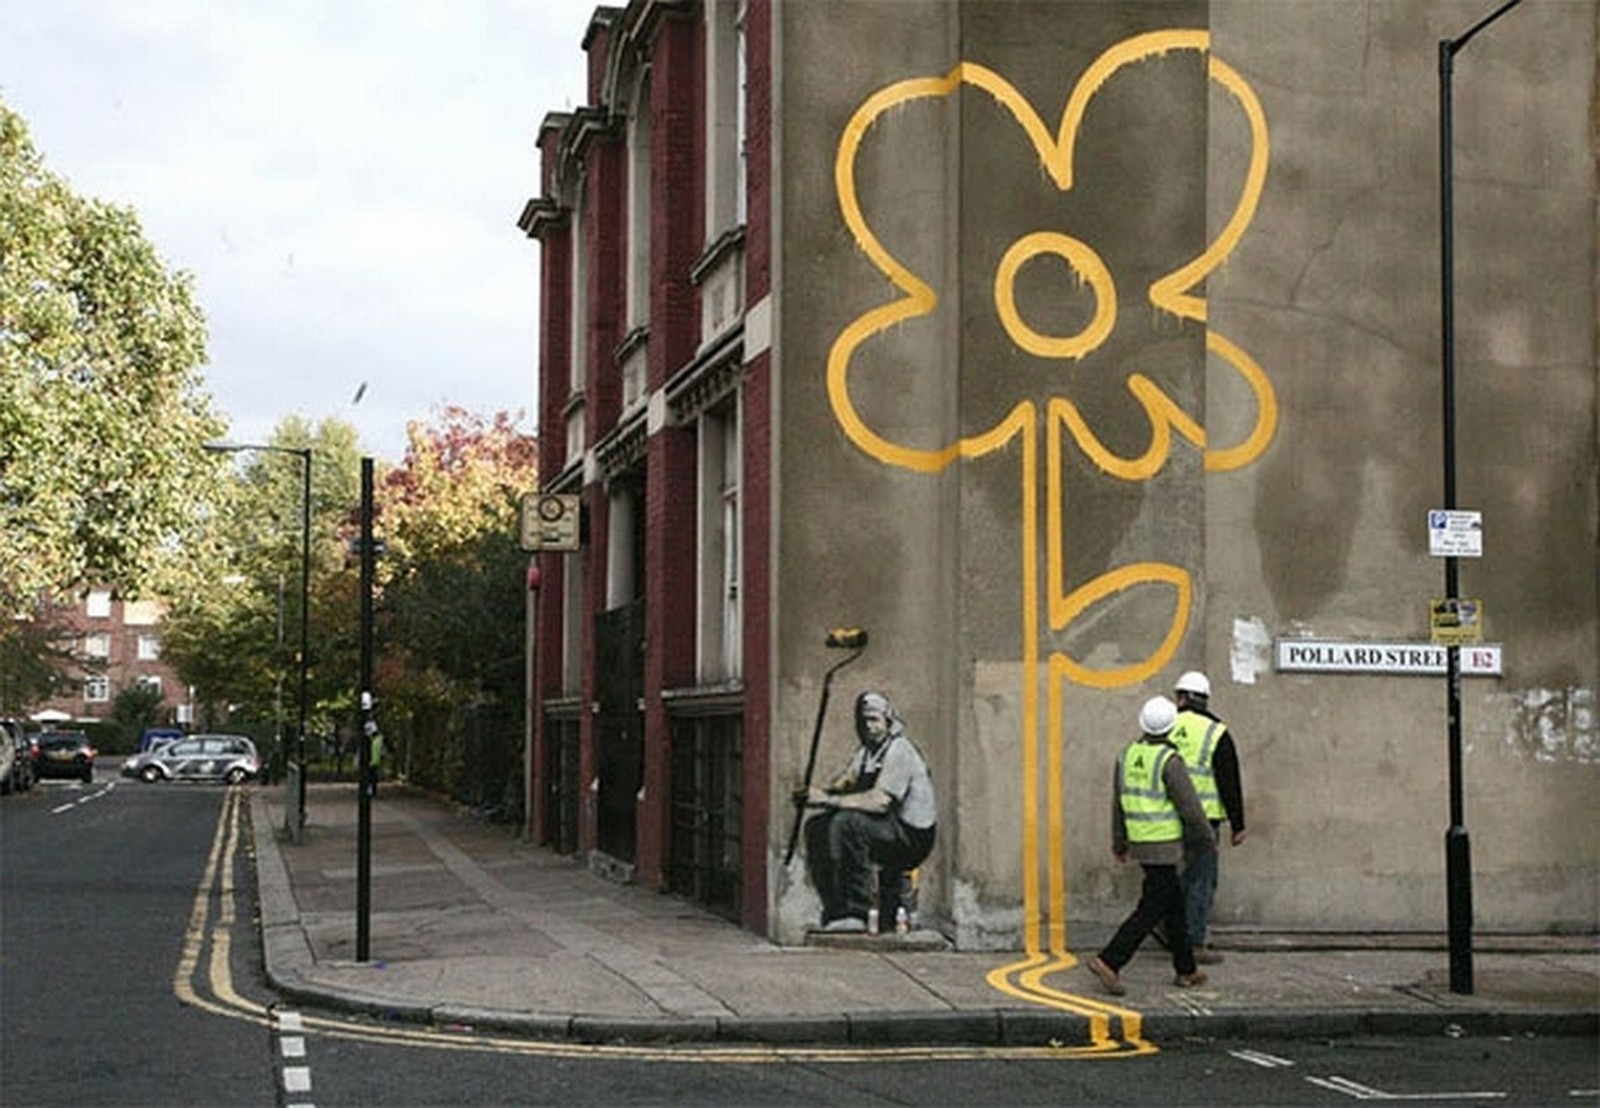 Banksy  Double Yellow Lines, 2007  Graffiti in Tower Hamlets, London